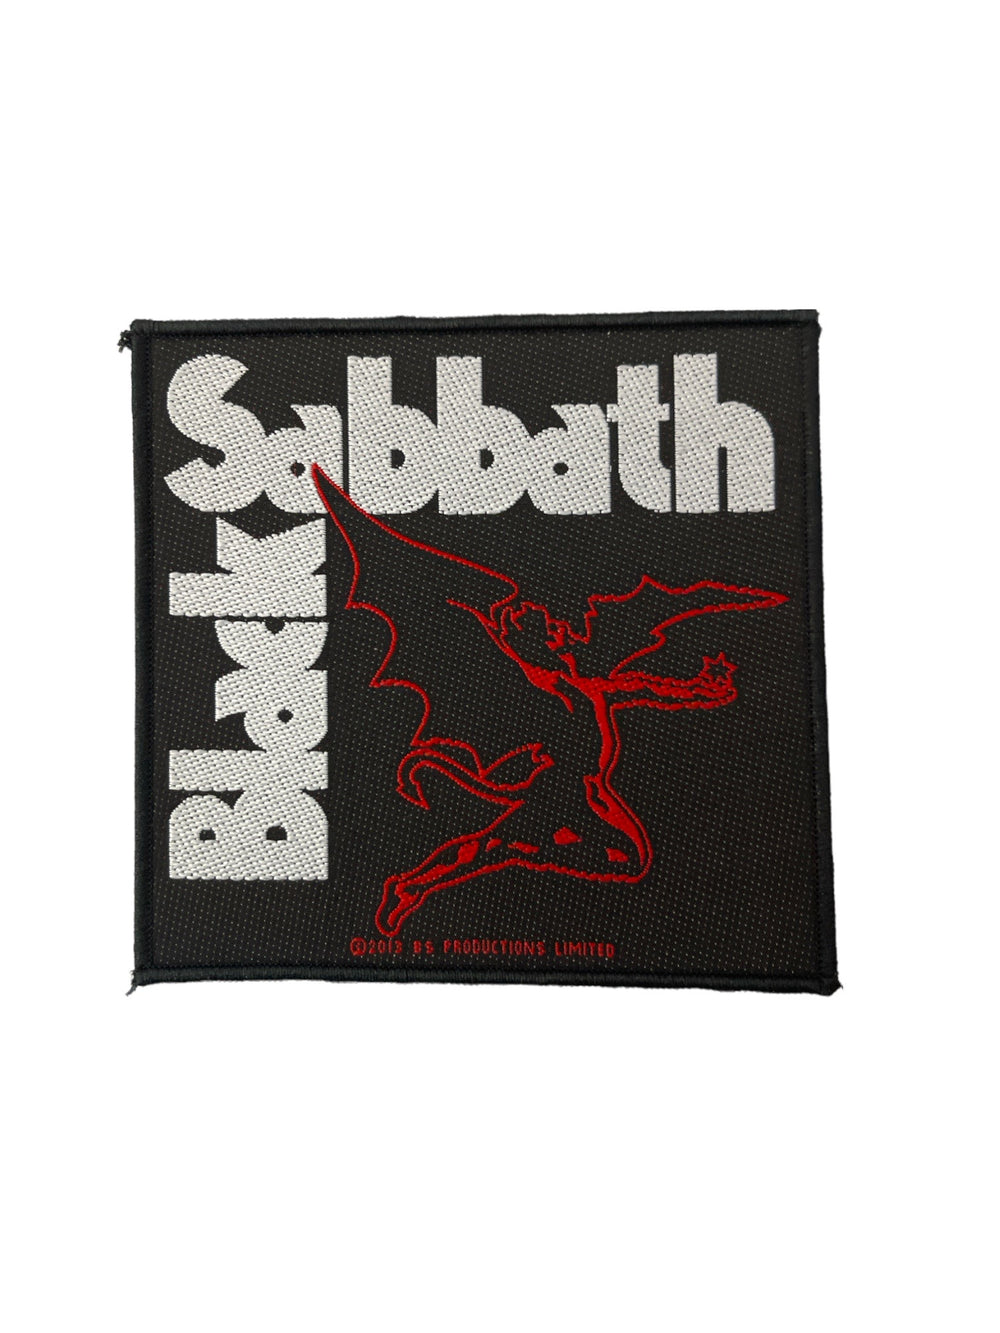 Black Sabbath Red Devil Official Sew On Woven Patch Brand New